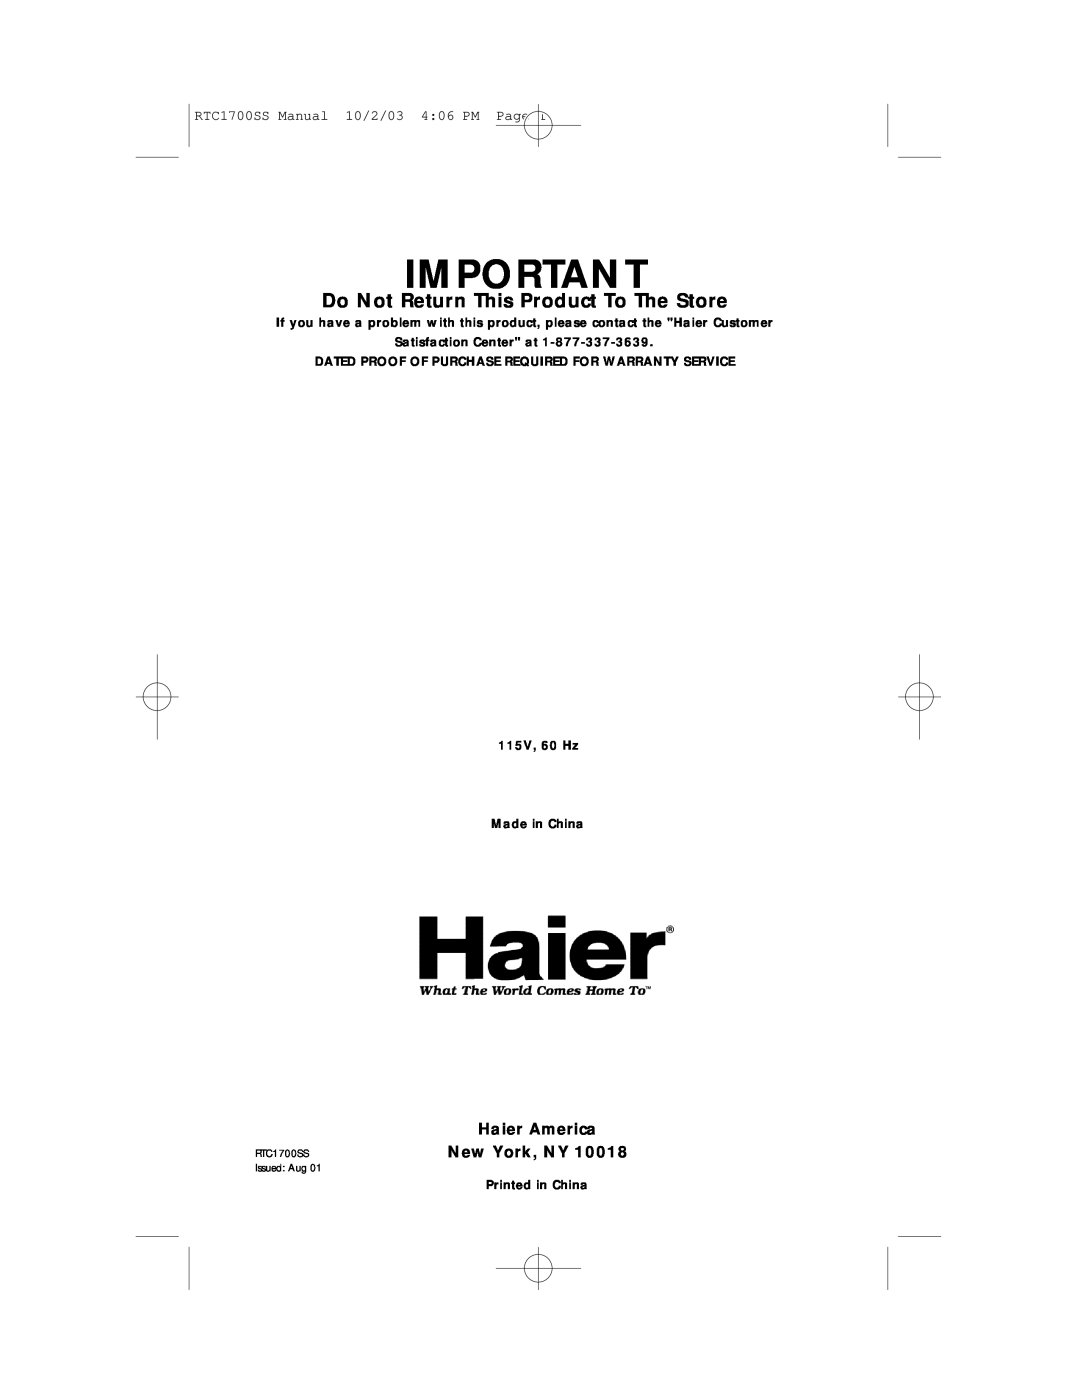 Haier Do Not Return This Product To The Store, Haier America New York, NY, RTC1700SS Manual 10/2/03 406 PM Page 